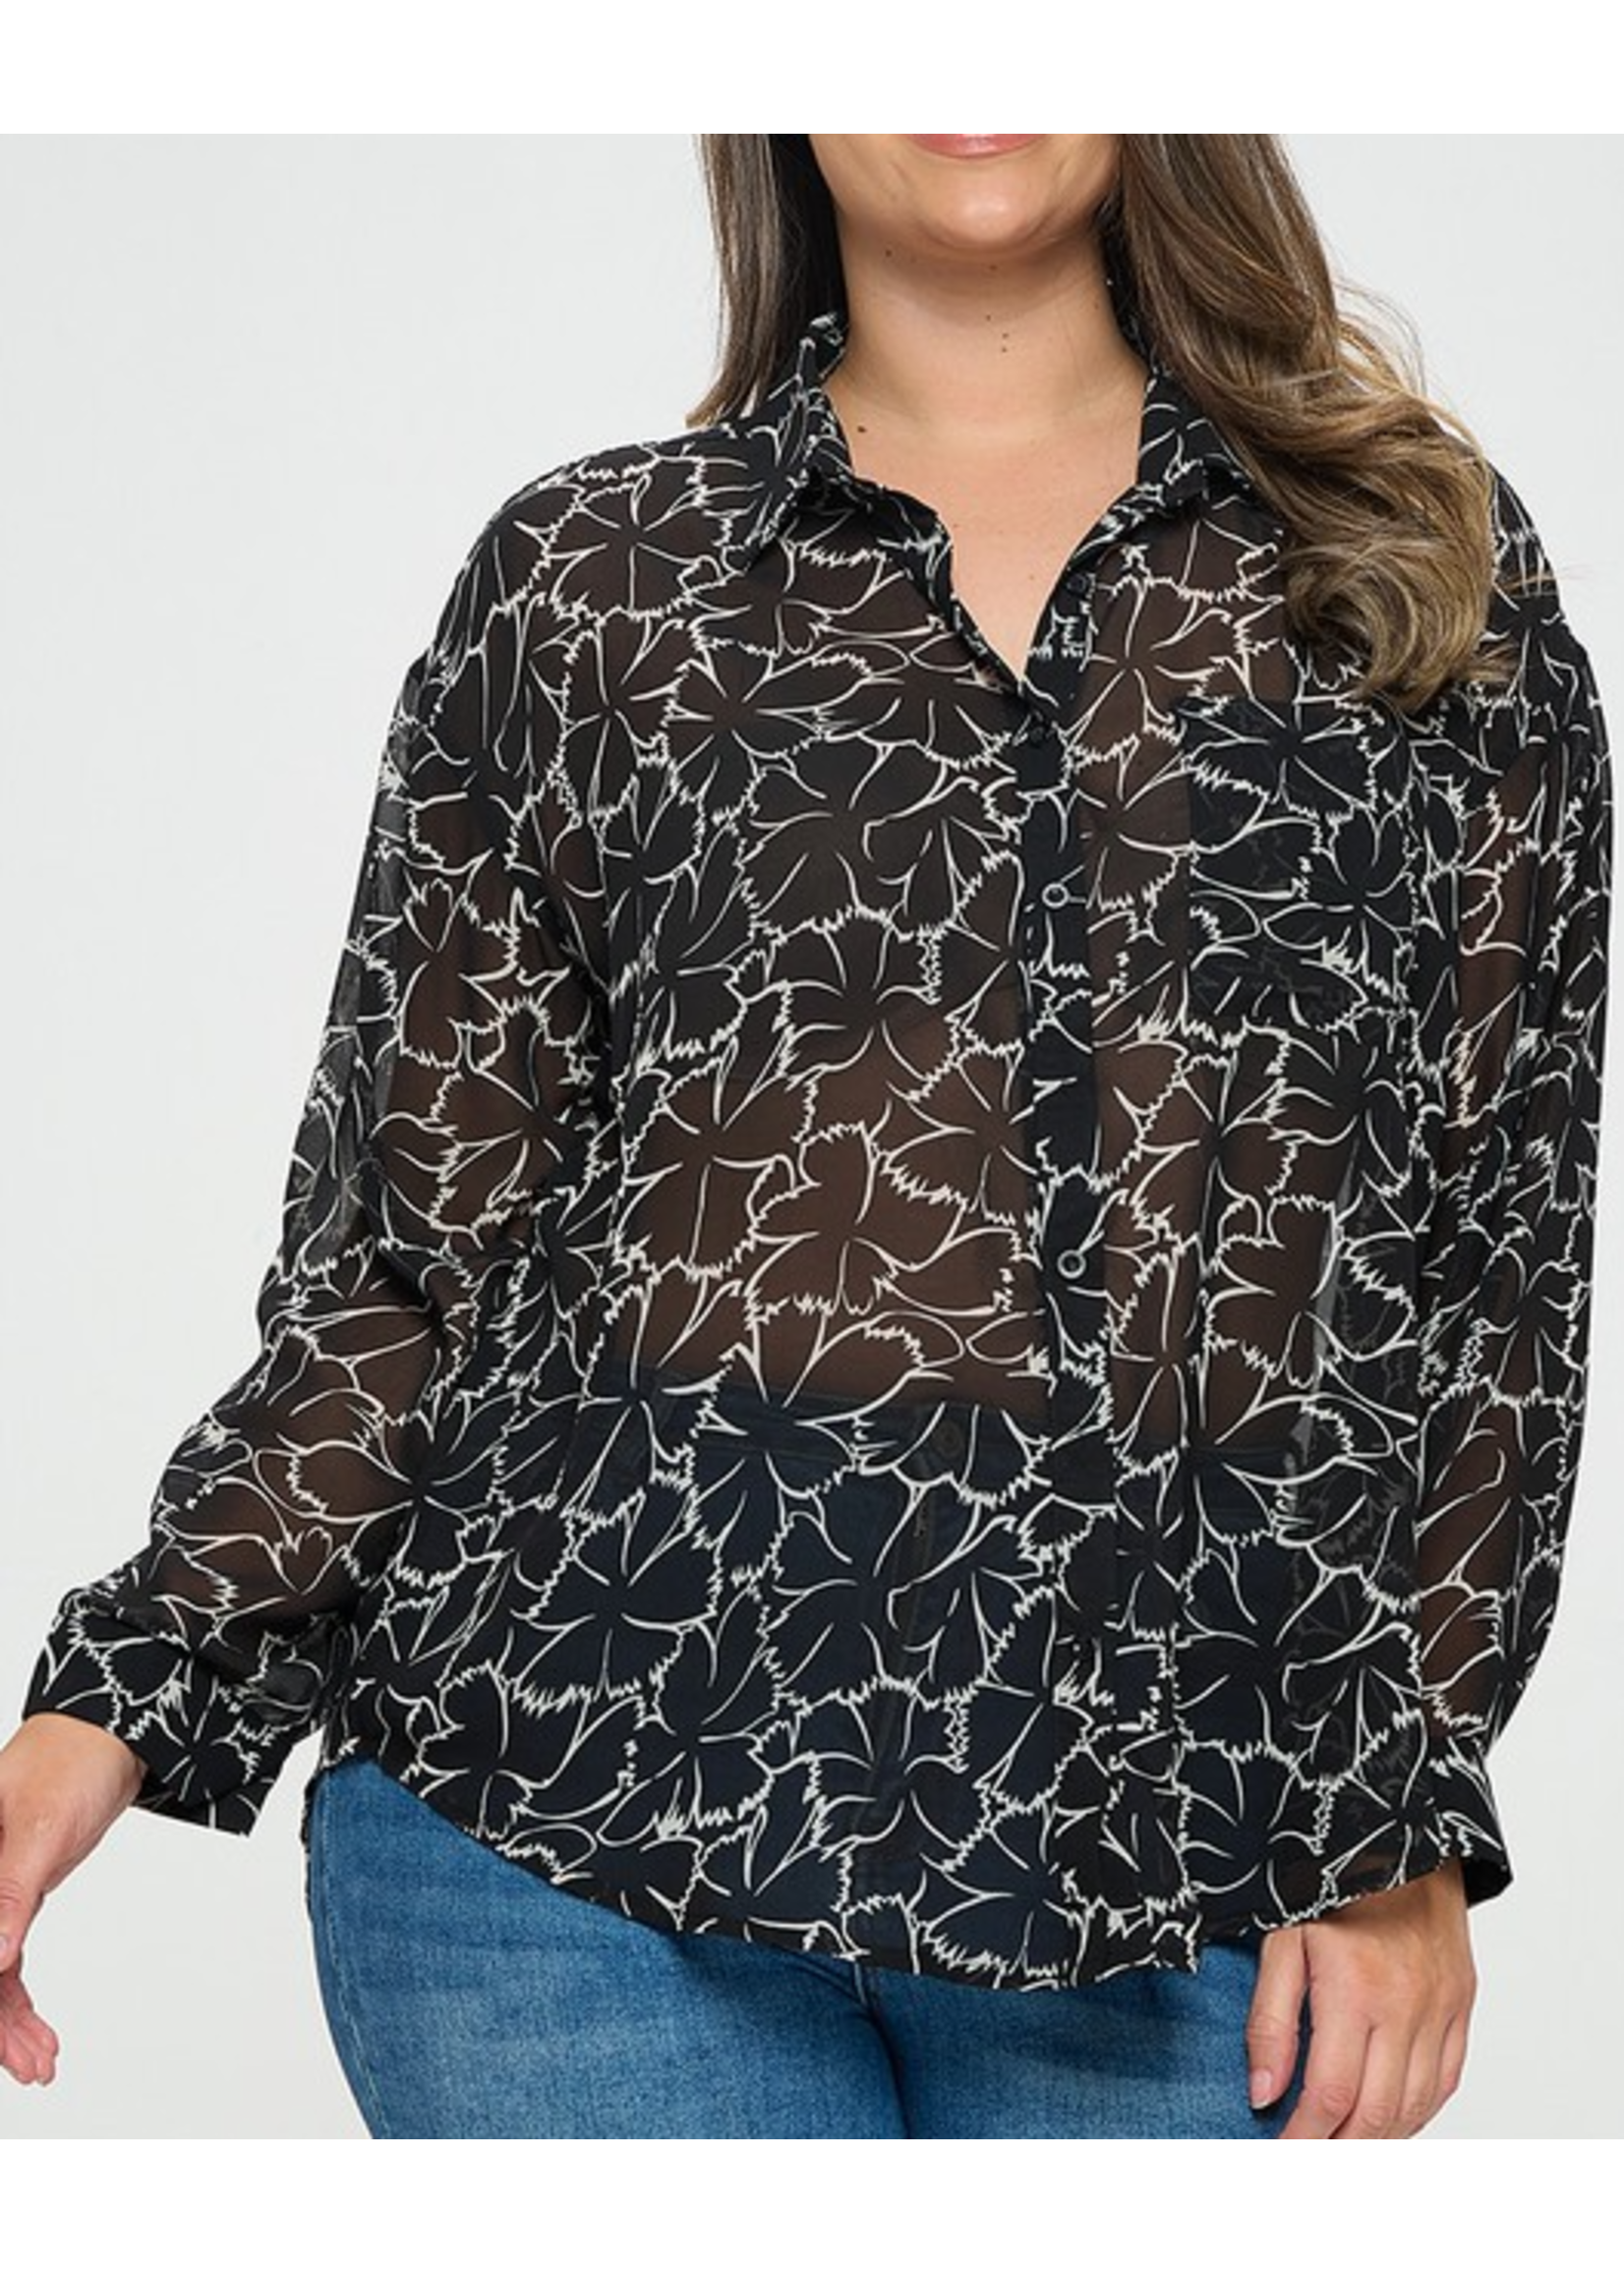 TPIT5363 - PLUS PRINT RELAXED FIT SHEER BLOUSE